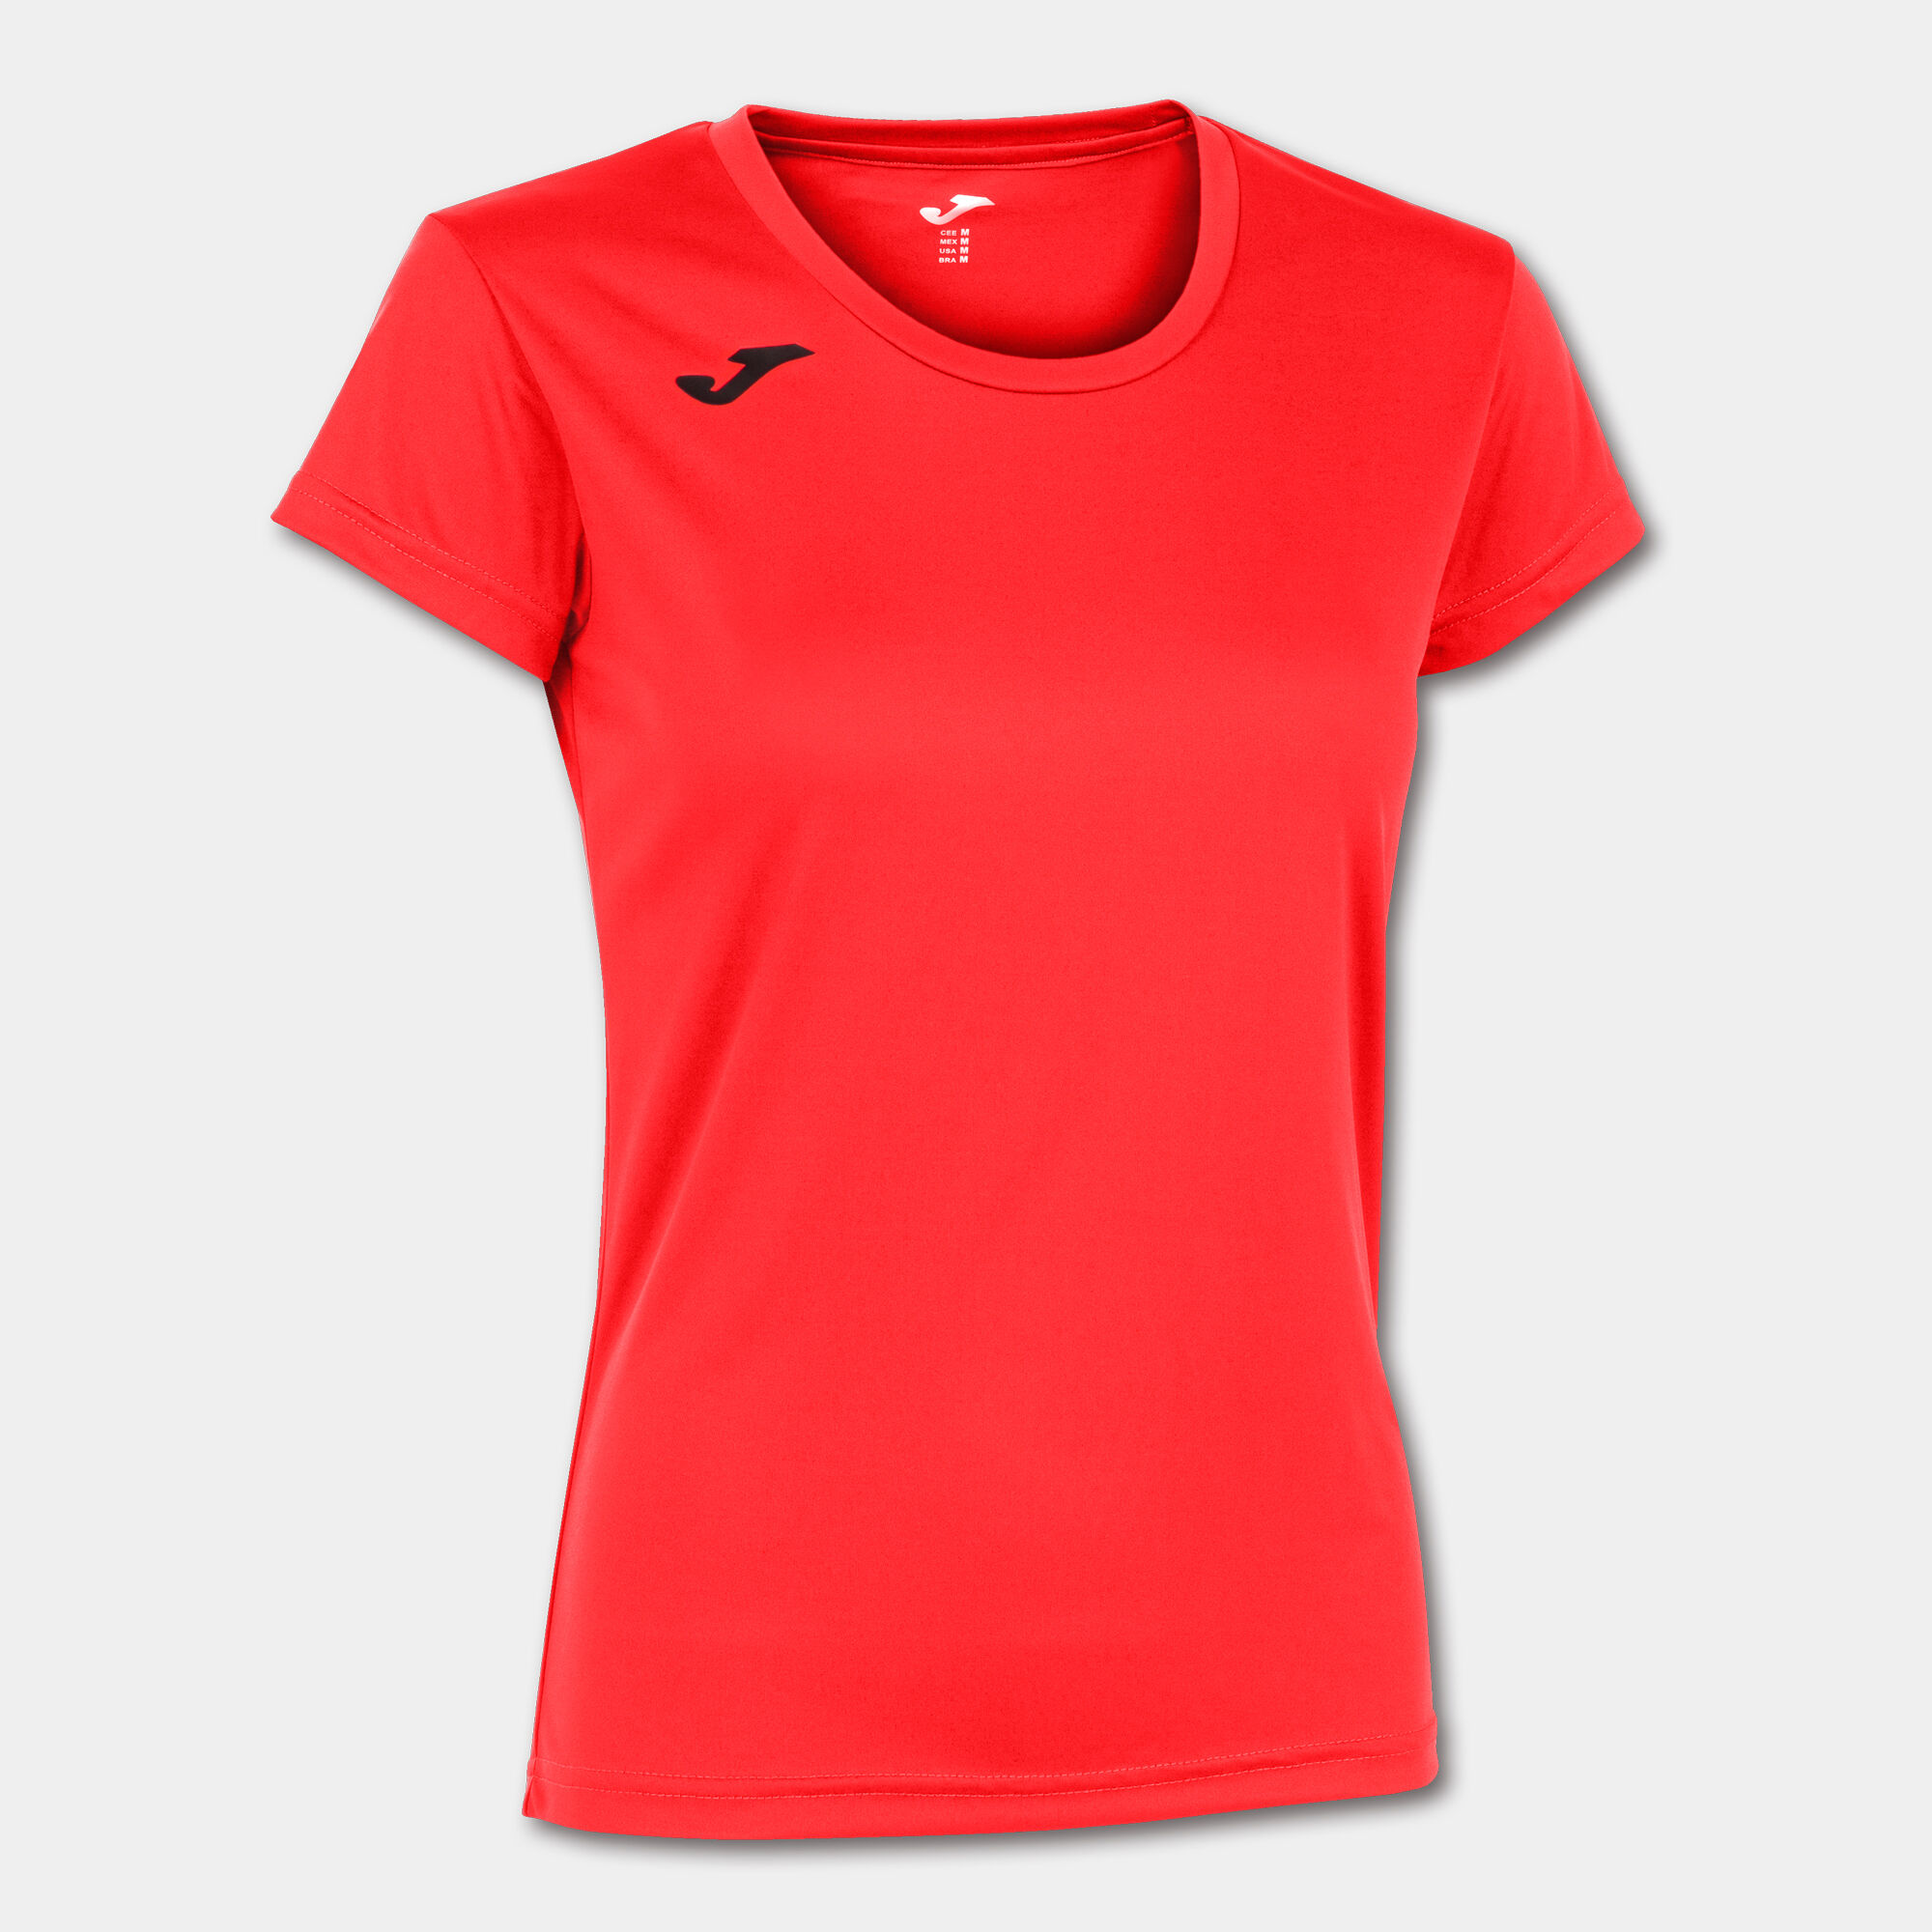 MAILLOT MANCHES COURTES FEMME RECORD II CORAIL FLUO